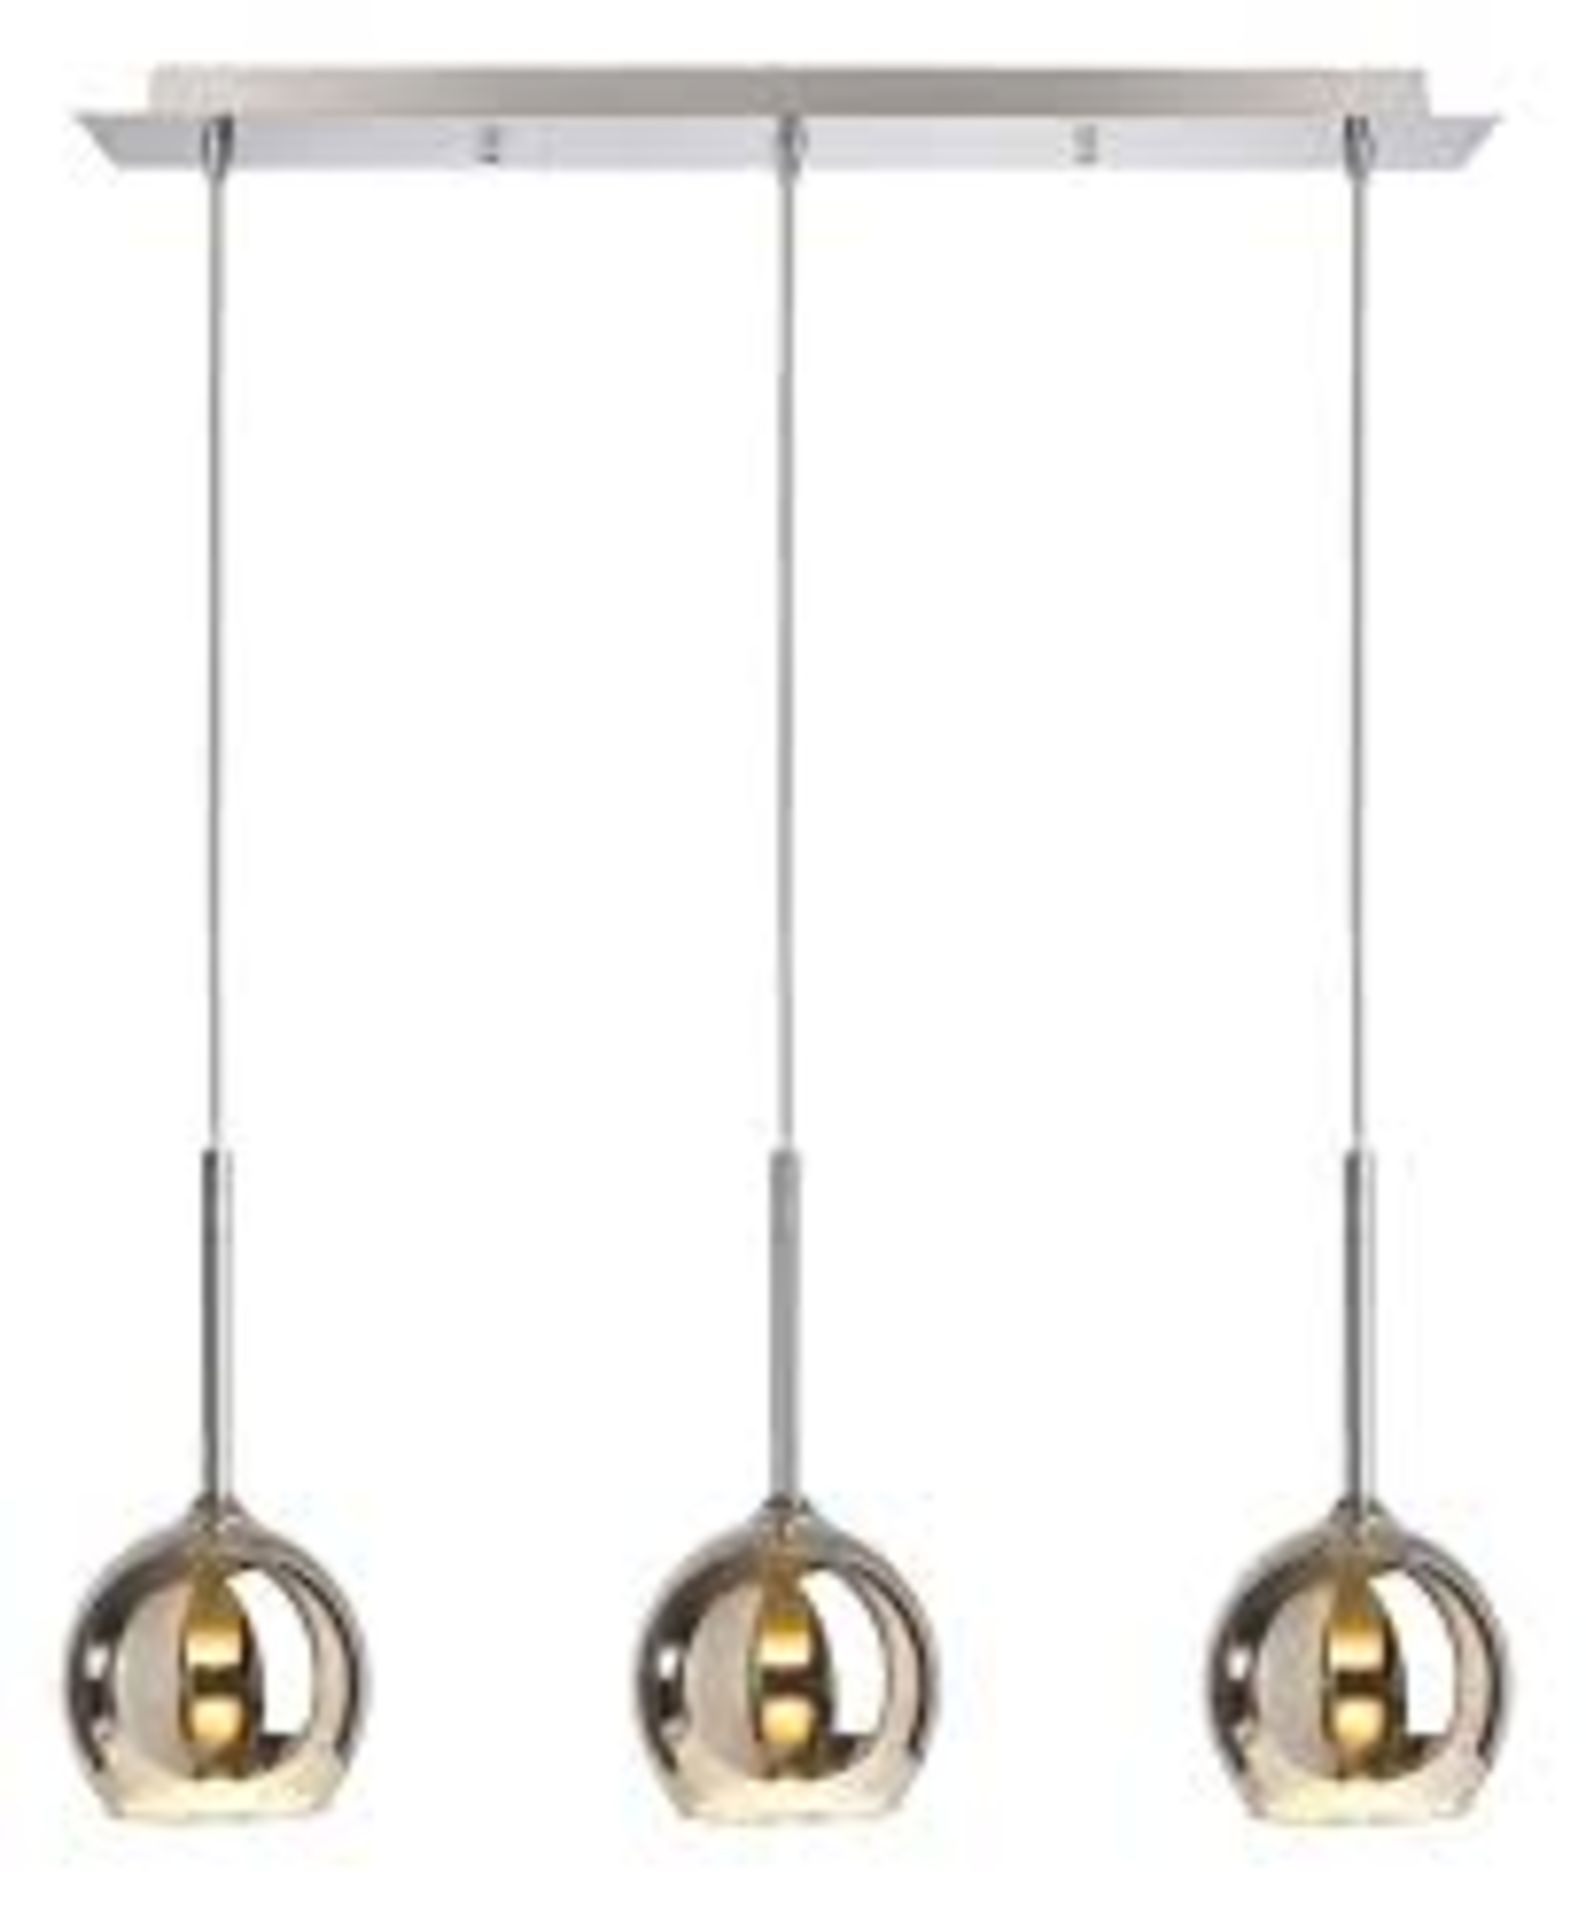 Boxed Decco Light 3 Light Designer Pendant Lamp RRP £160 (16543) (Appraisals Are Available Upon